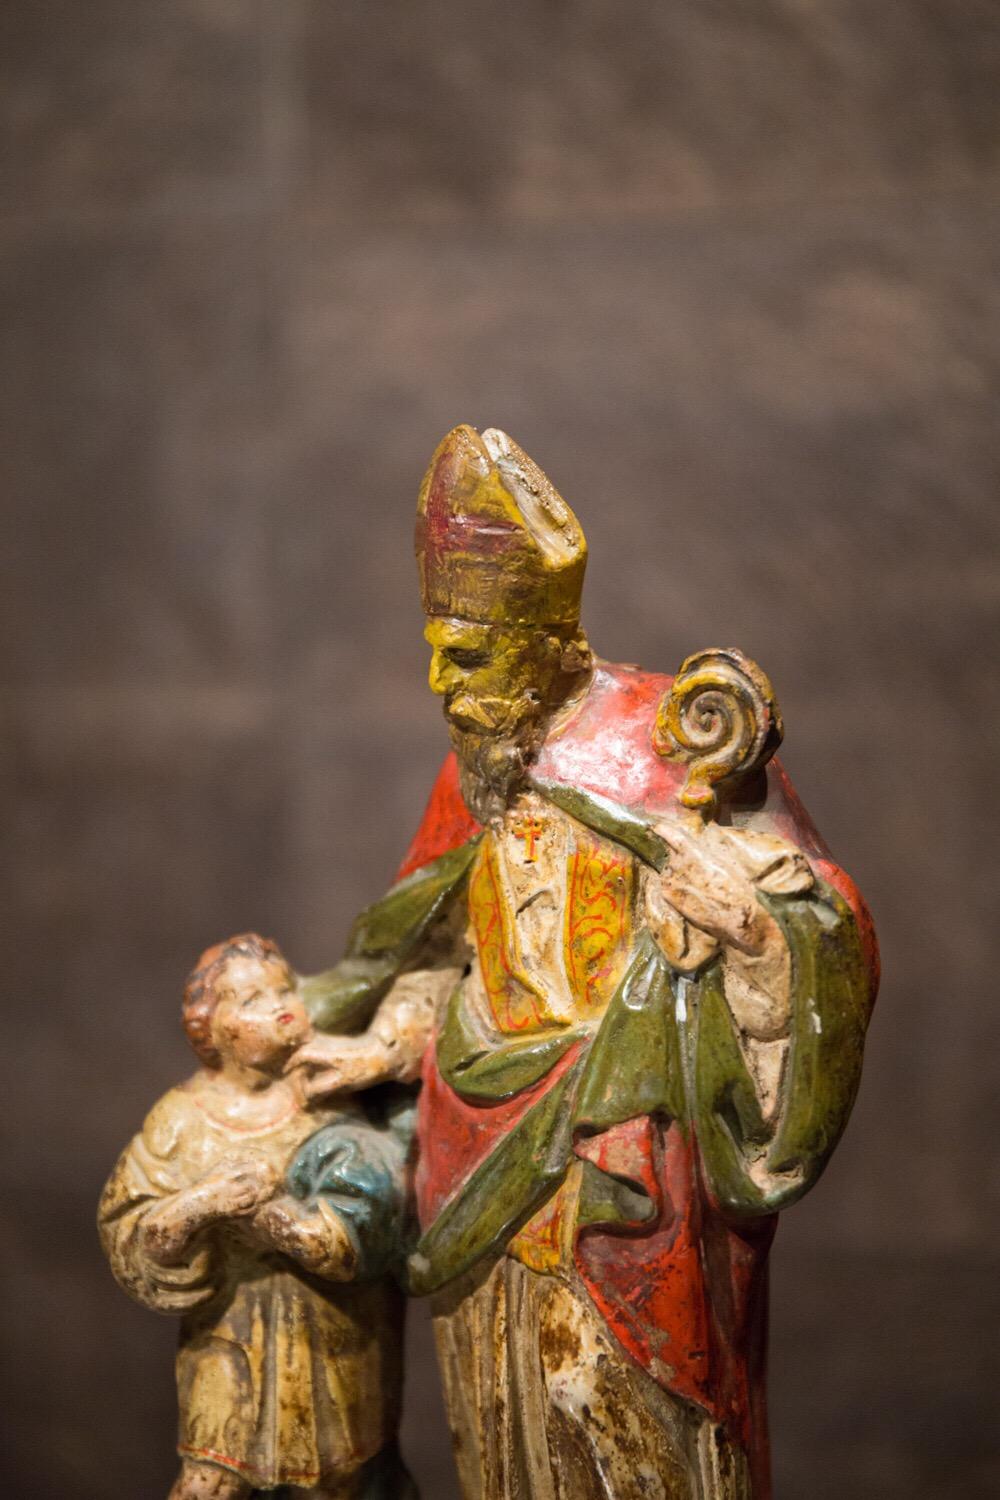 Beautiful polychrome terracotta sculpture from the early 18th century.
Its style and excellent quality suggest it was made in central Italy.
The statue's iconography, depicting a figure wearing the bishop's headdress and tiara and accompanied by a